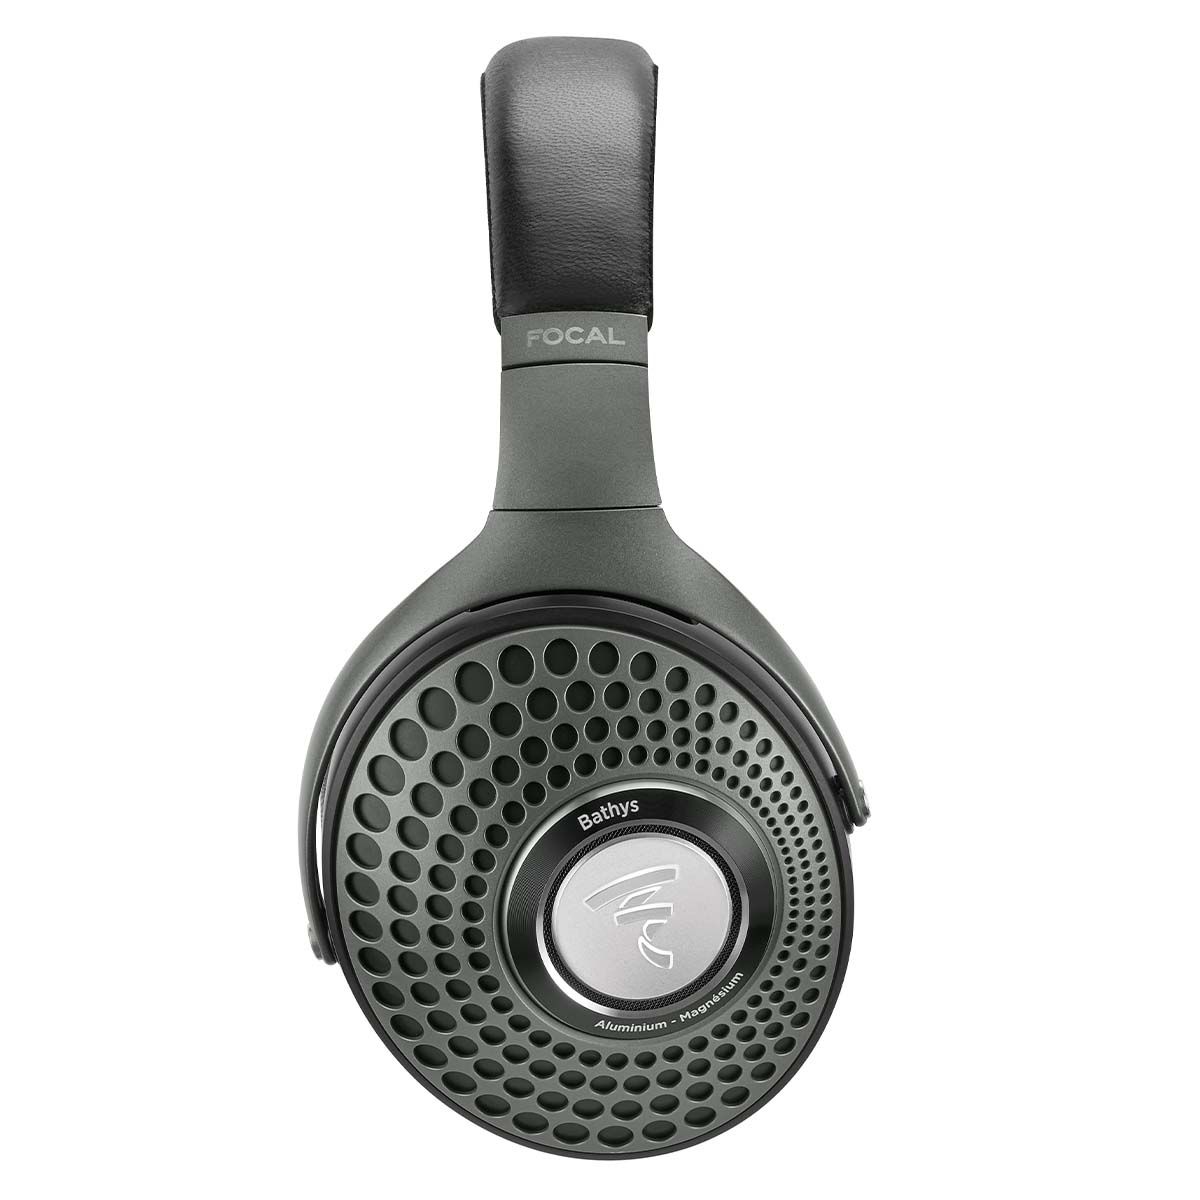 Focal Bathys Over Ear Noise Cancelling Headphones - right side view